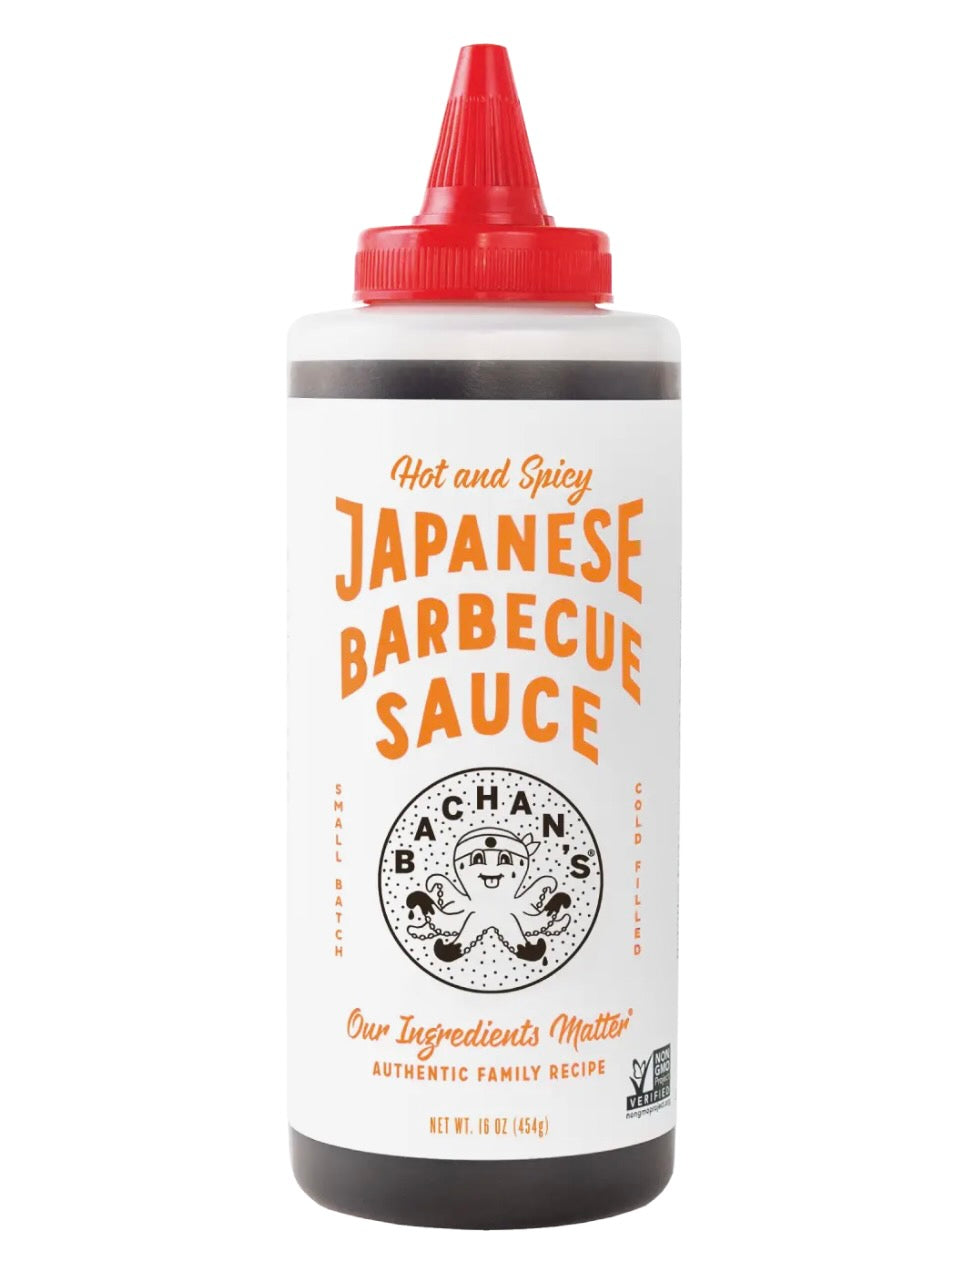 BACHAN'S HOT & SPICY BARBECUE SAUCE